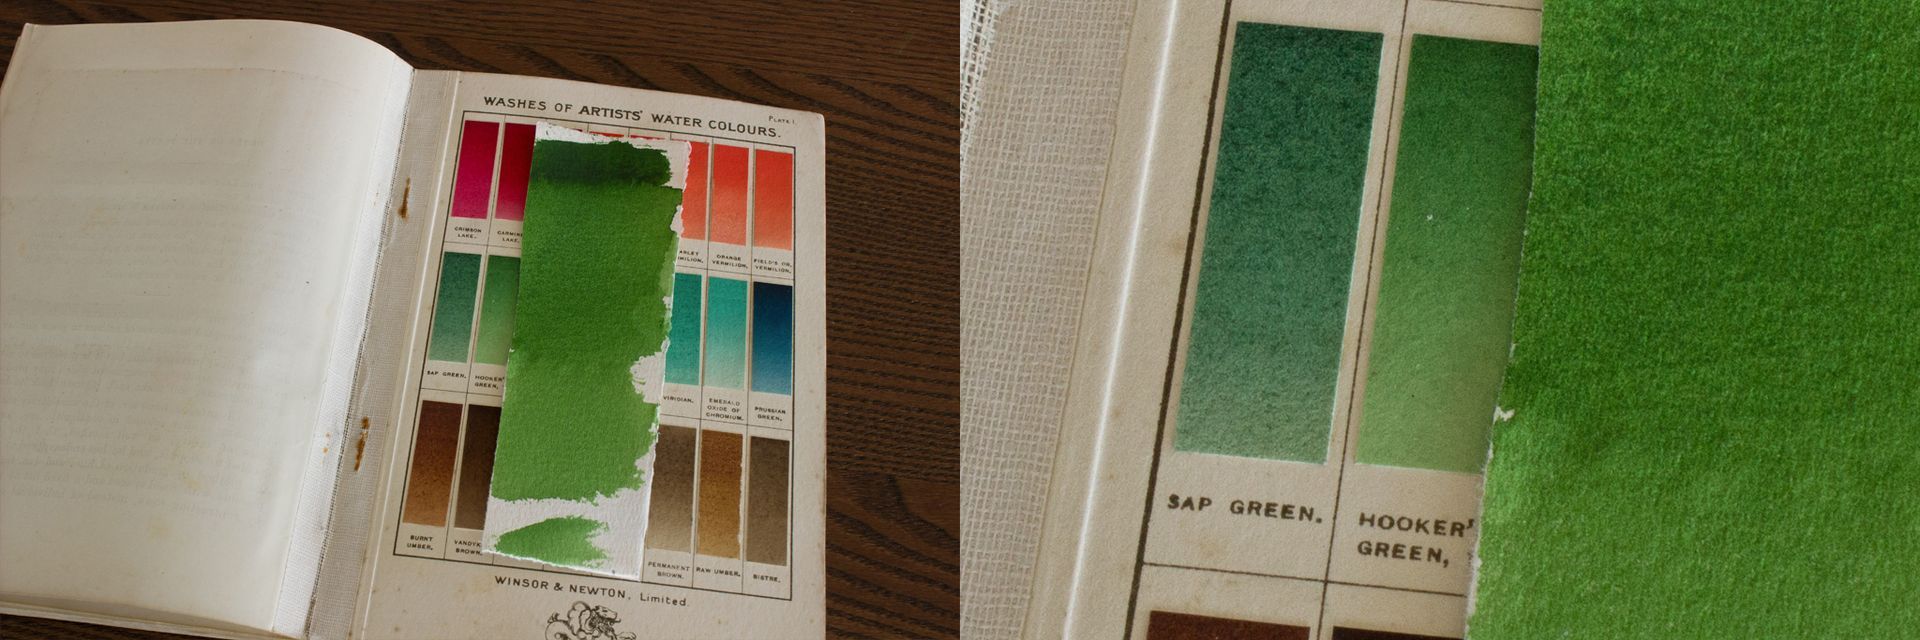 Using actual watercolour washes from the late-19th century to check the colour of Hooker's Green No1 watercolour from A J Ludlow  is authentic.